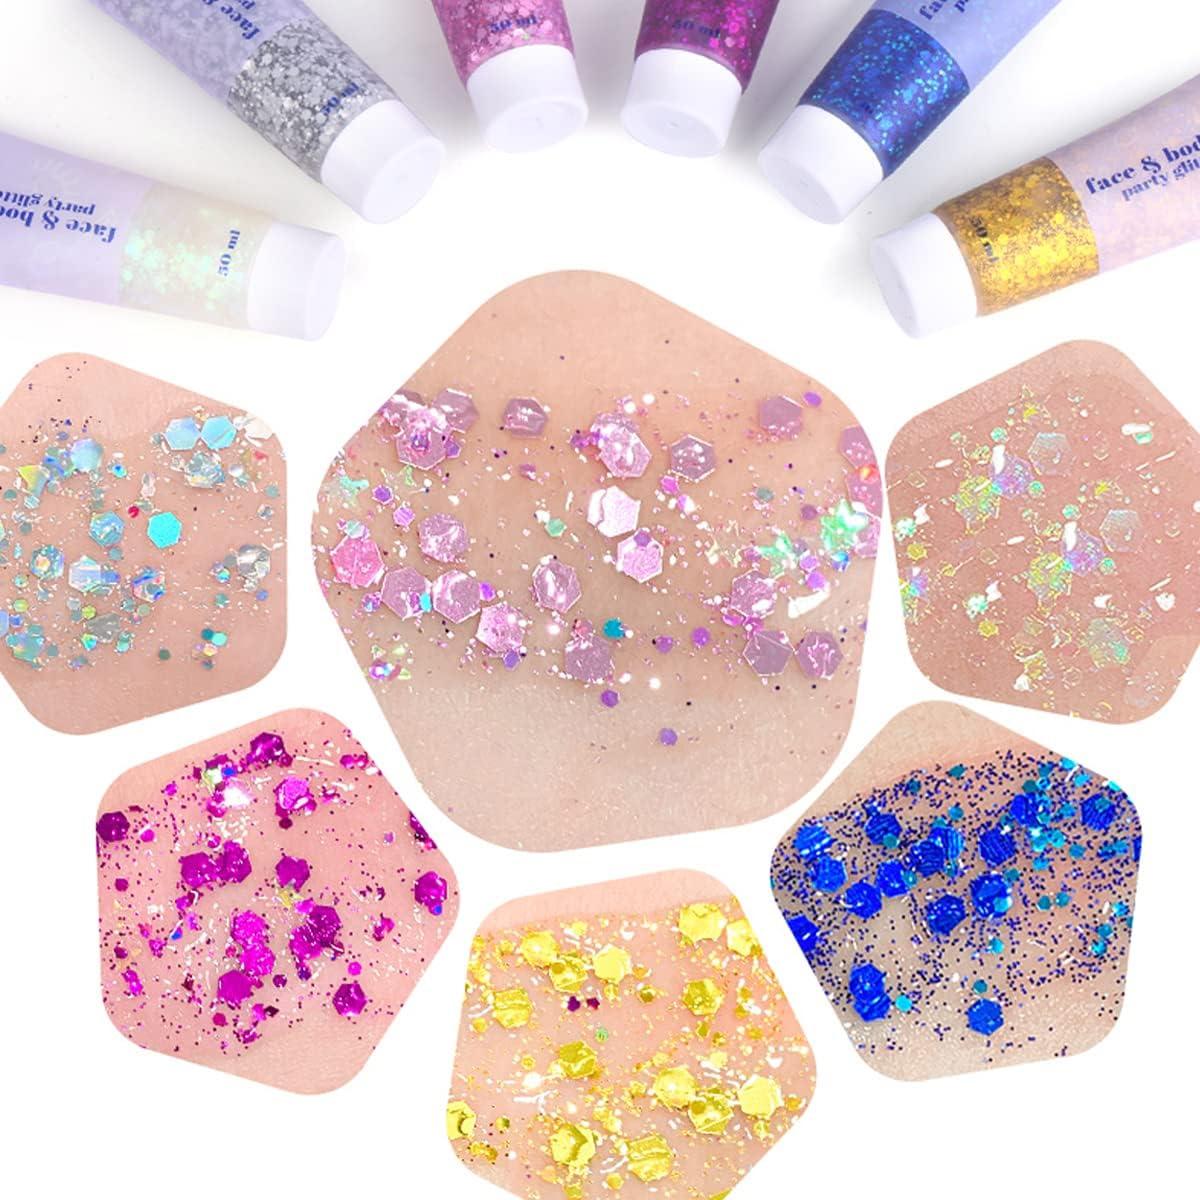 Paminify White Face Glitter Gel,Singer Concerts Music Festival Rave  Accessories,Mermaid Body Glitter Gel, Halloween Hair Sequins Face Glitter  Paint